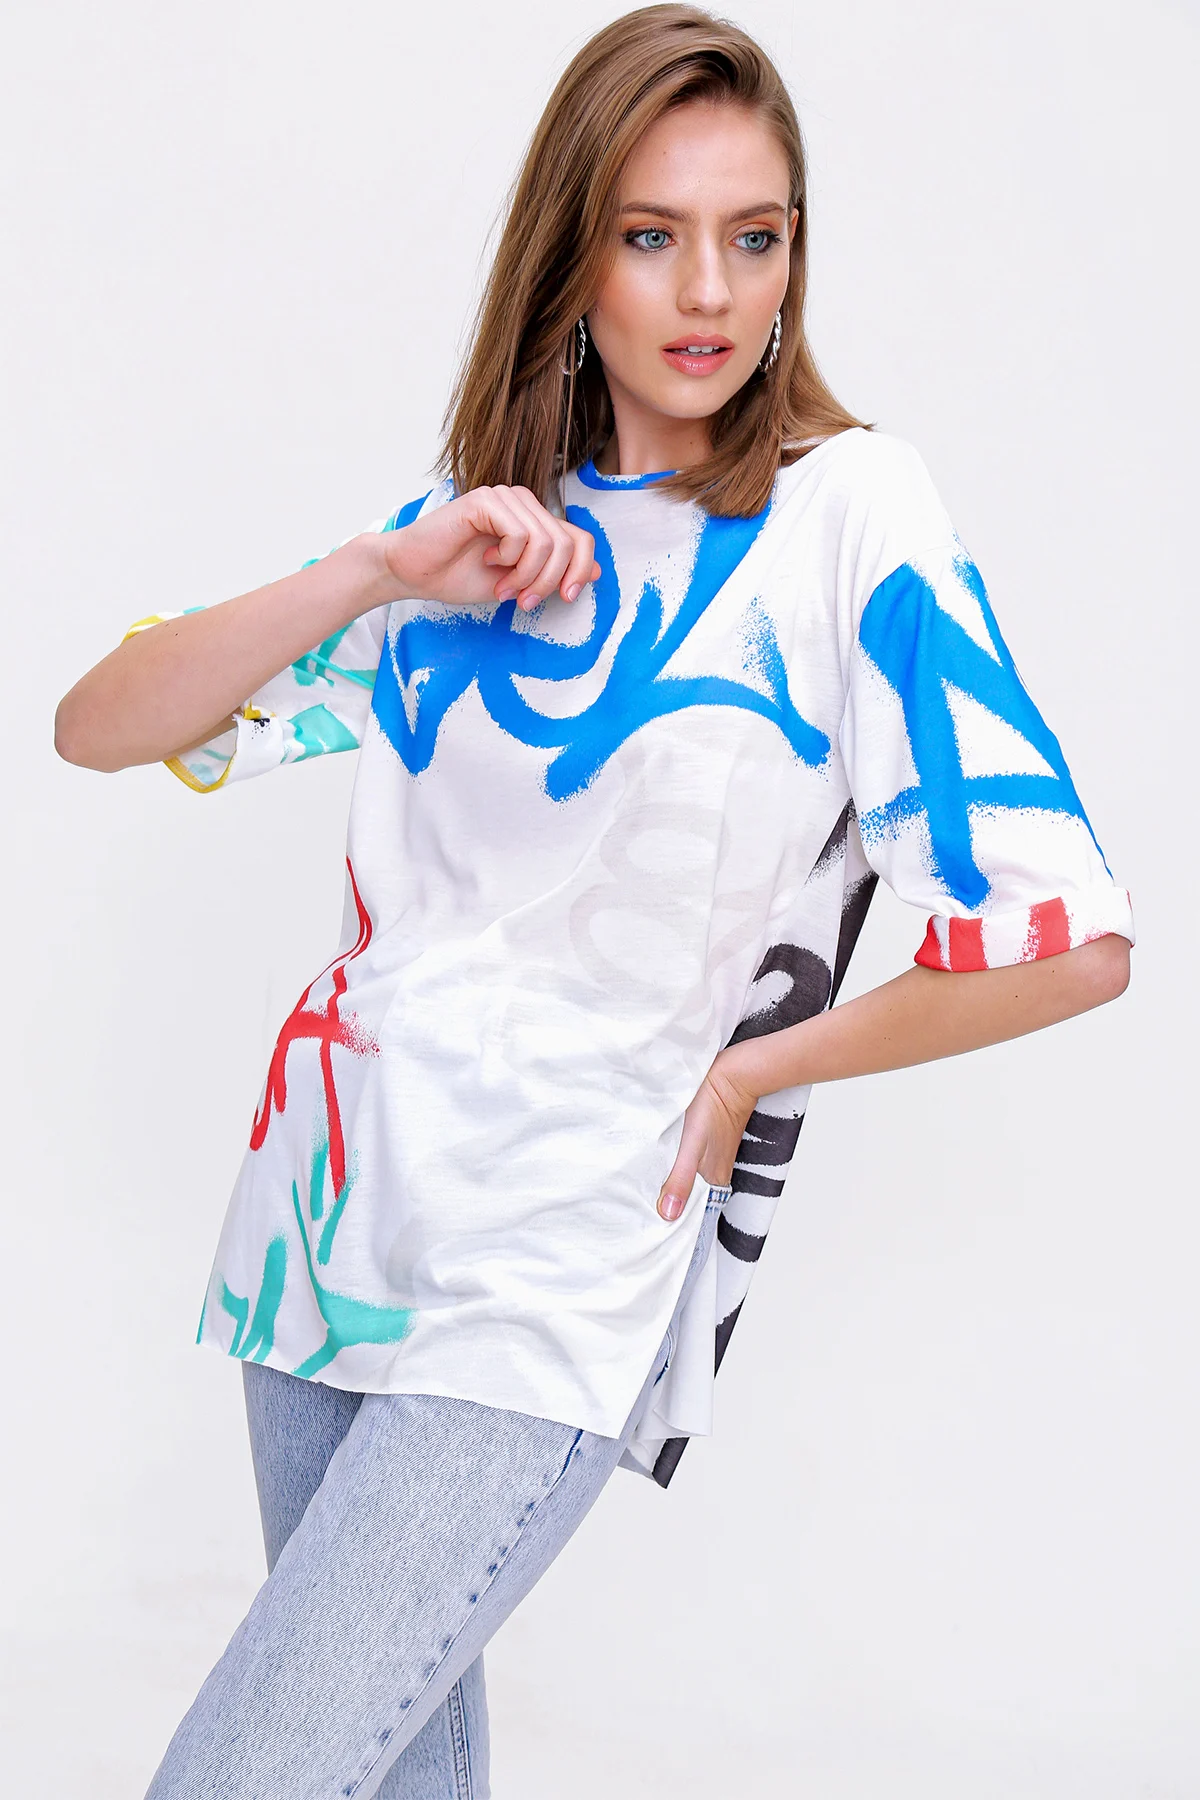 With a slit Oversize Tshirt 2021 Summer Spring Women 'S T-shirt Fashion Tops Sexy Print Ladies top